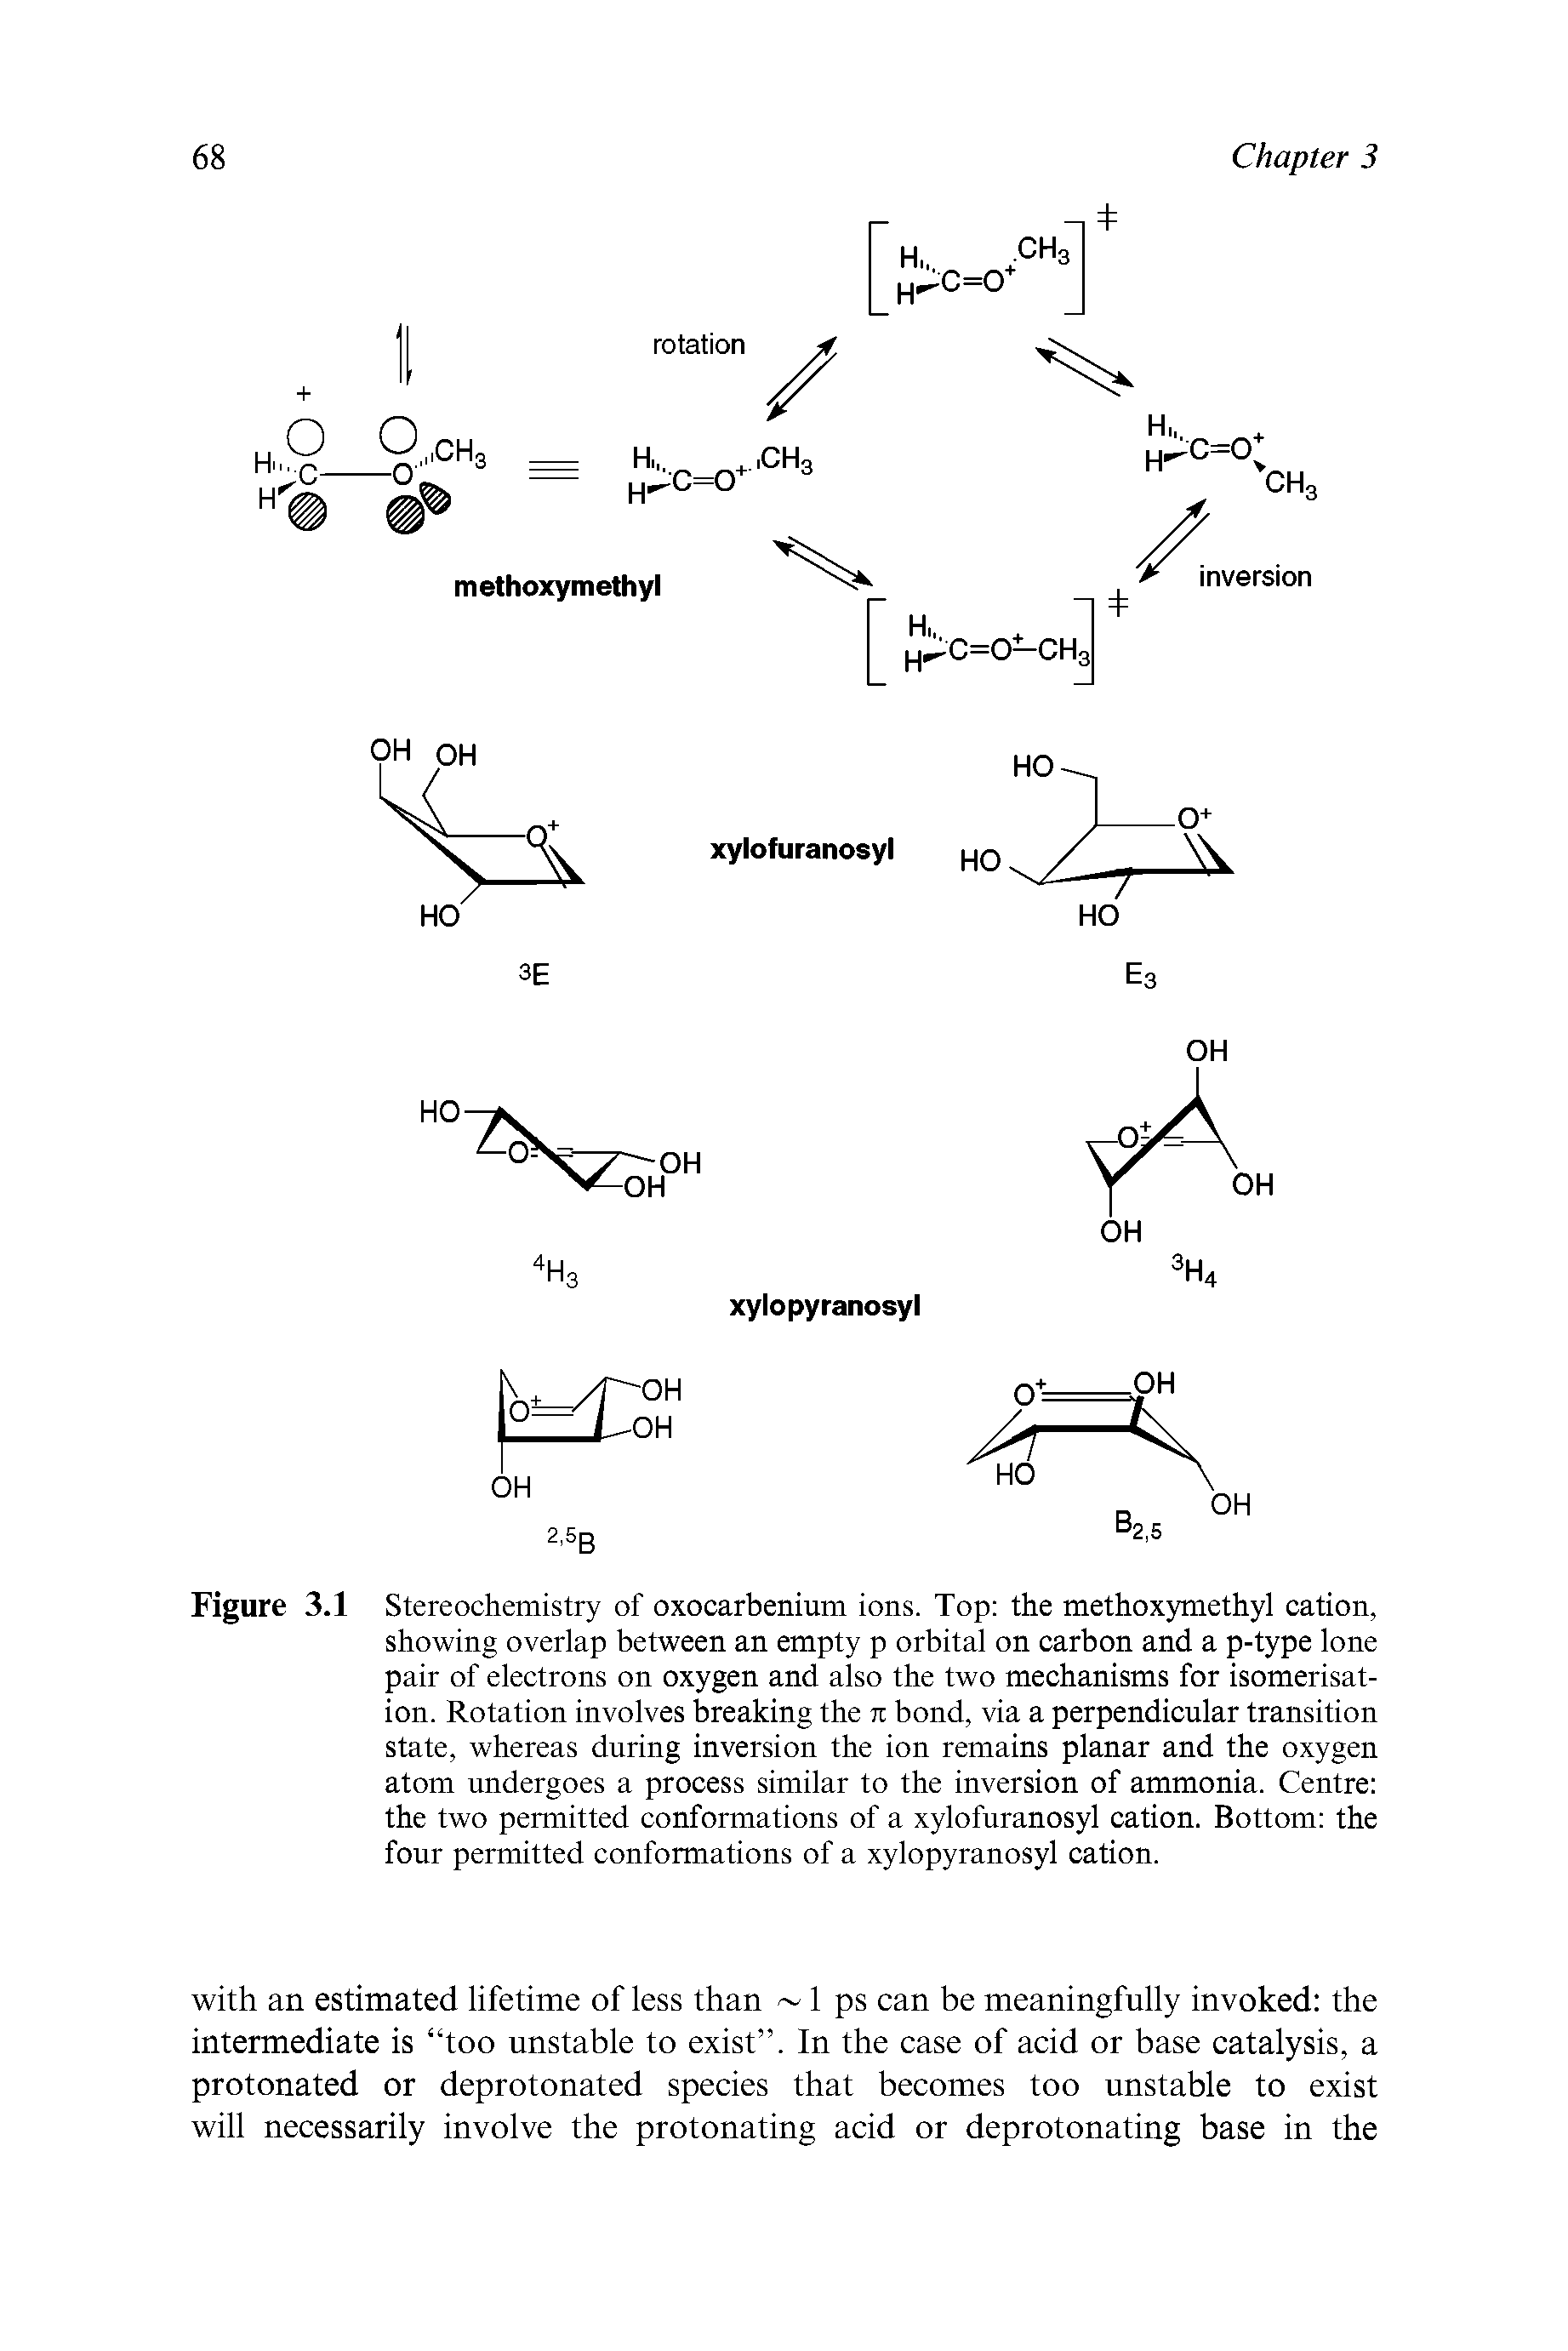 Figure 3.1 Stereochemistry of oxocarbenium ions. Top the methoxymethyl cation, showing overlap between an empty p orbital on carbon and a p-type lone pair of electrons on oxygen and also the two mechanisms for isomerisation. Rotation involves breaking the n bond, via a perpendicular transition state, whereas during inversion the ion remains planar and the oxygen atom undergoes a process similar to the inversion of ammonia. Centre the two permitted conformations of a xylofuranosyl cation. Bottom the four permitted conformations of a xylopyranosyl cation.